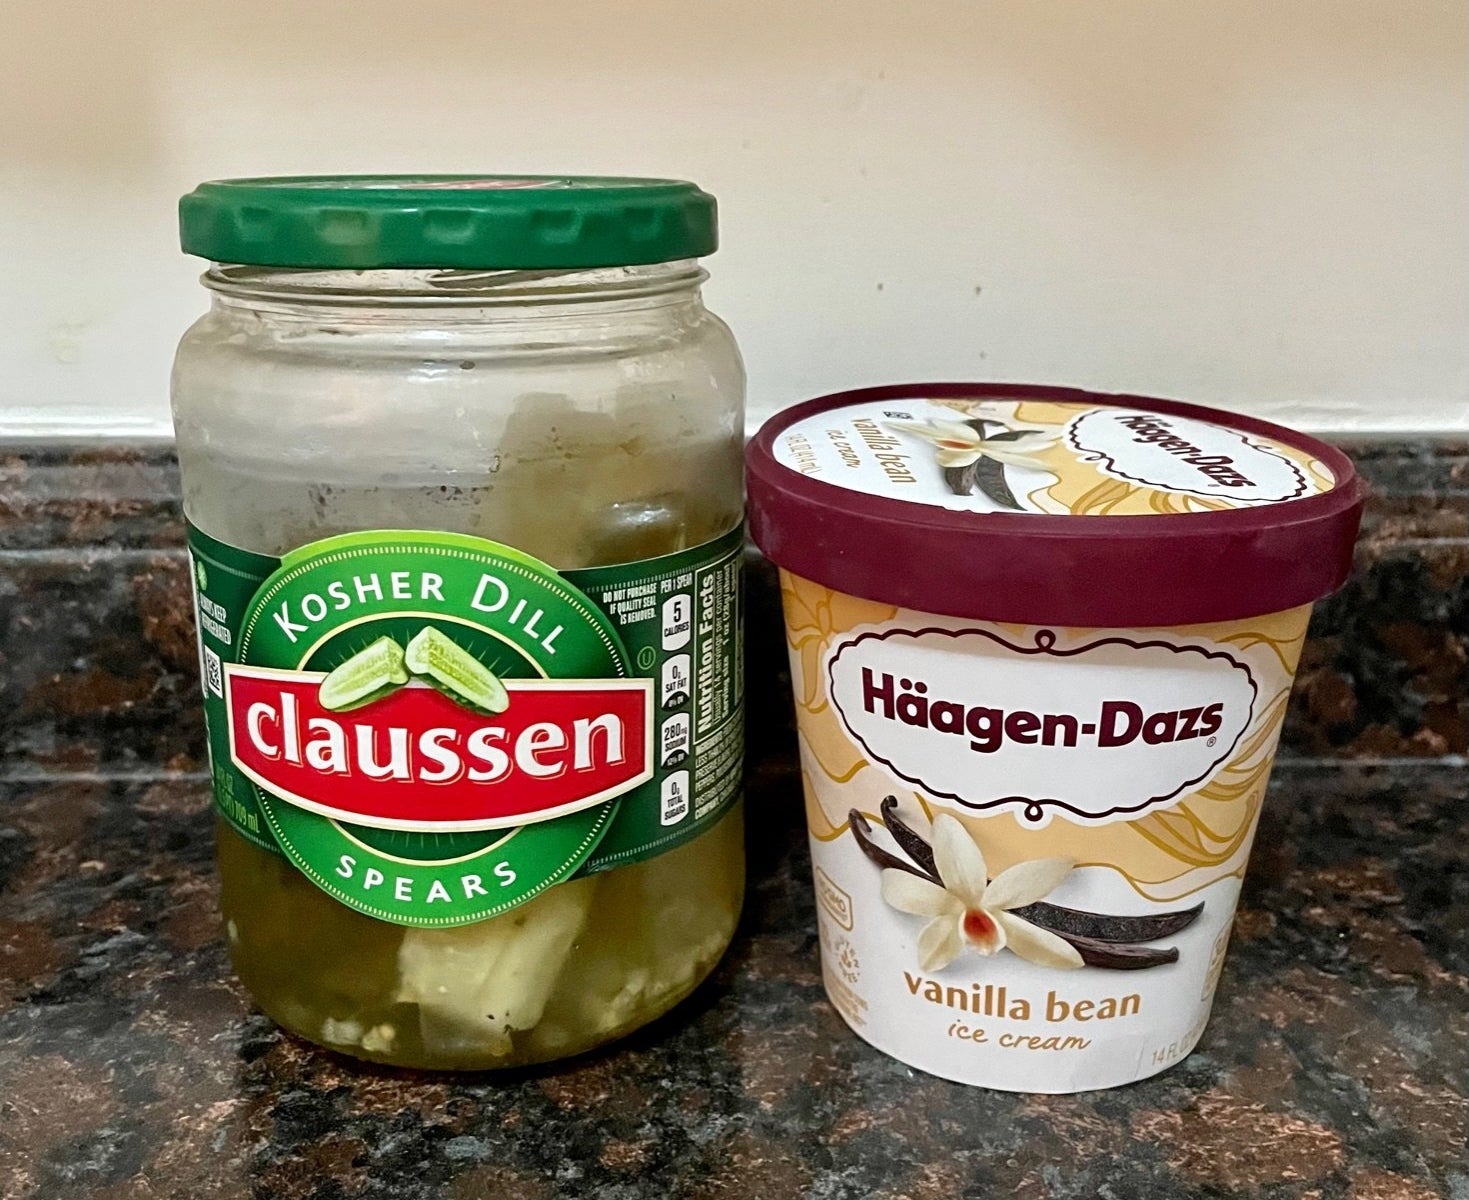 Pickles and ice cream